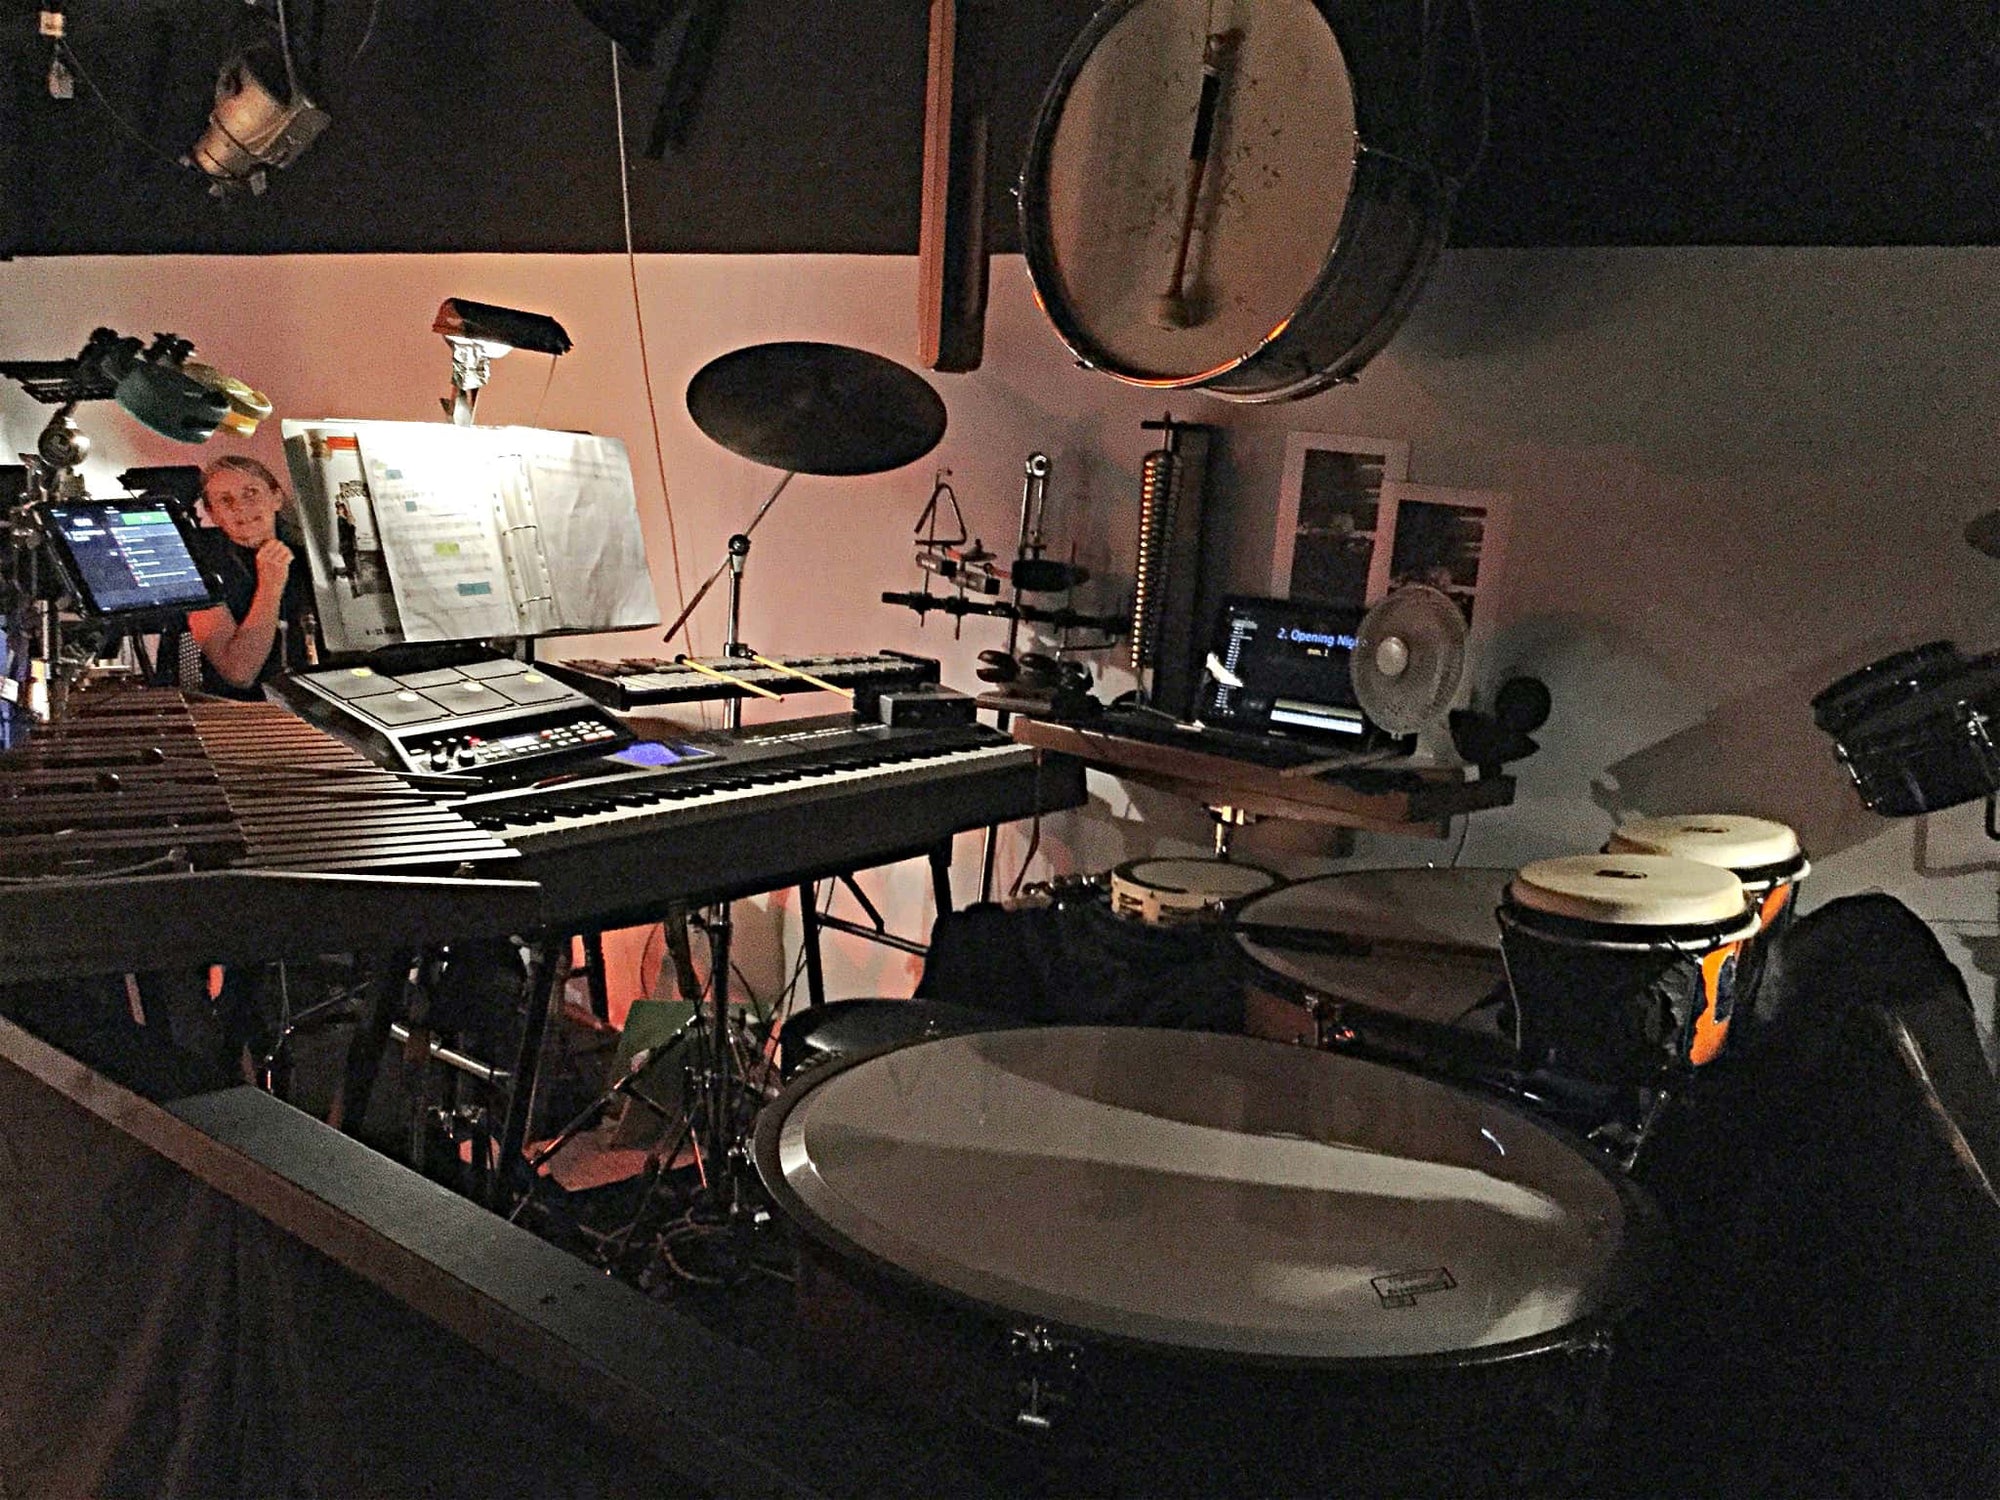 Lindsay Kaul’s percussion setup for The Producers at The Players Theater in Port Macquarie in New South Wales, Australia.